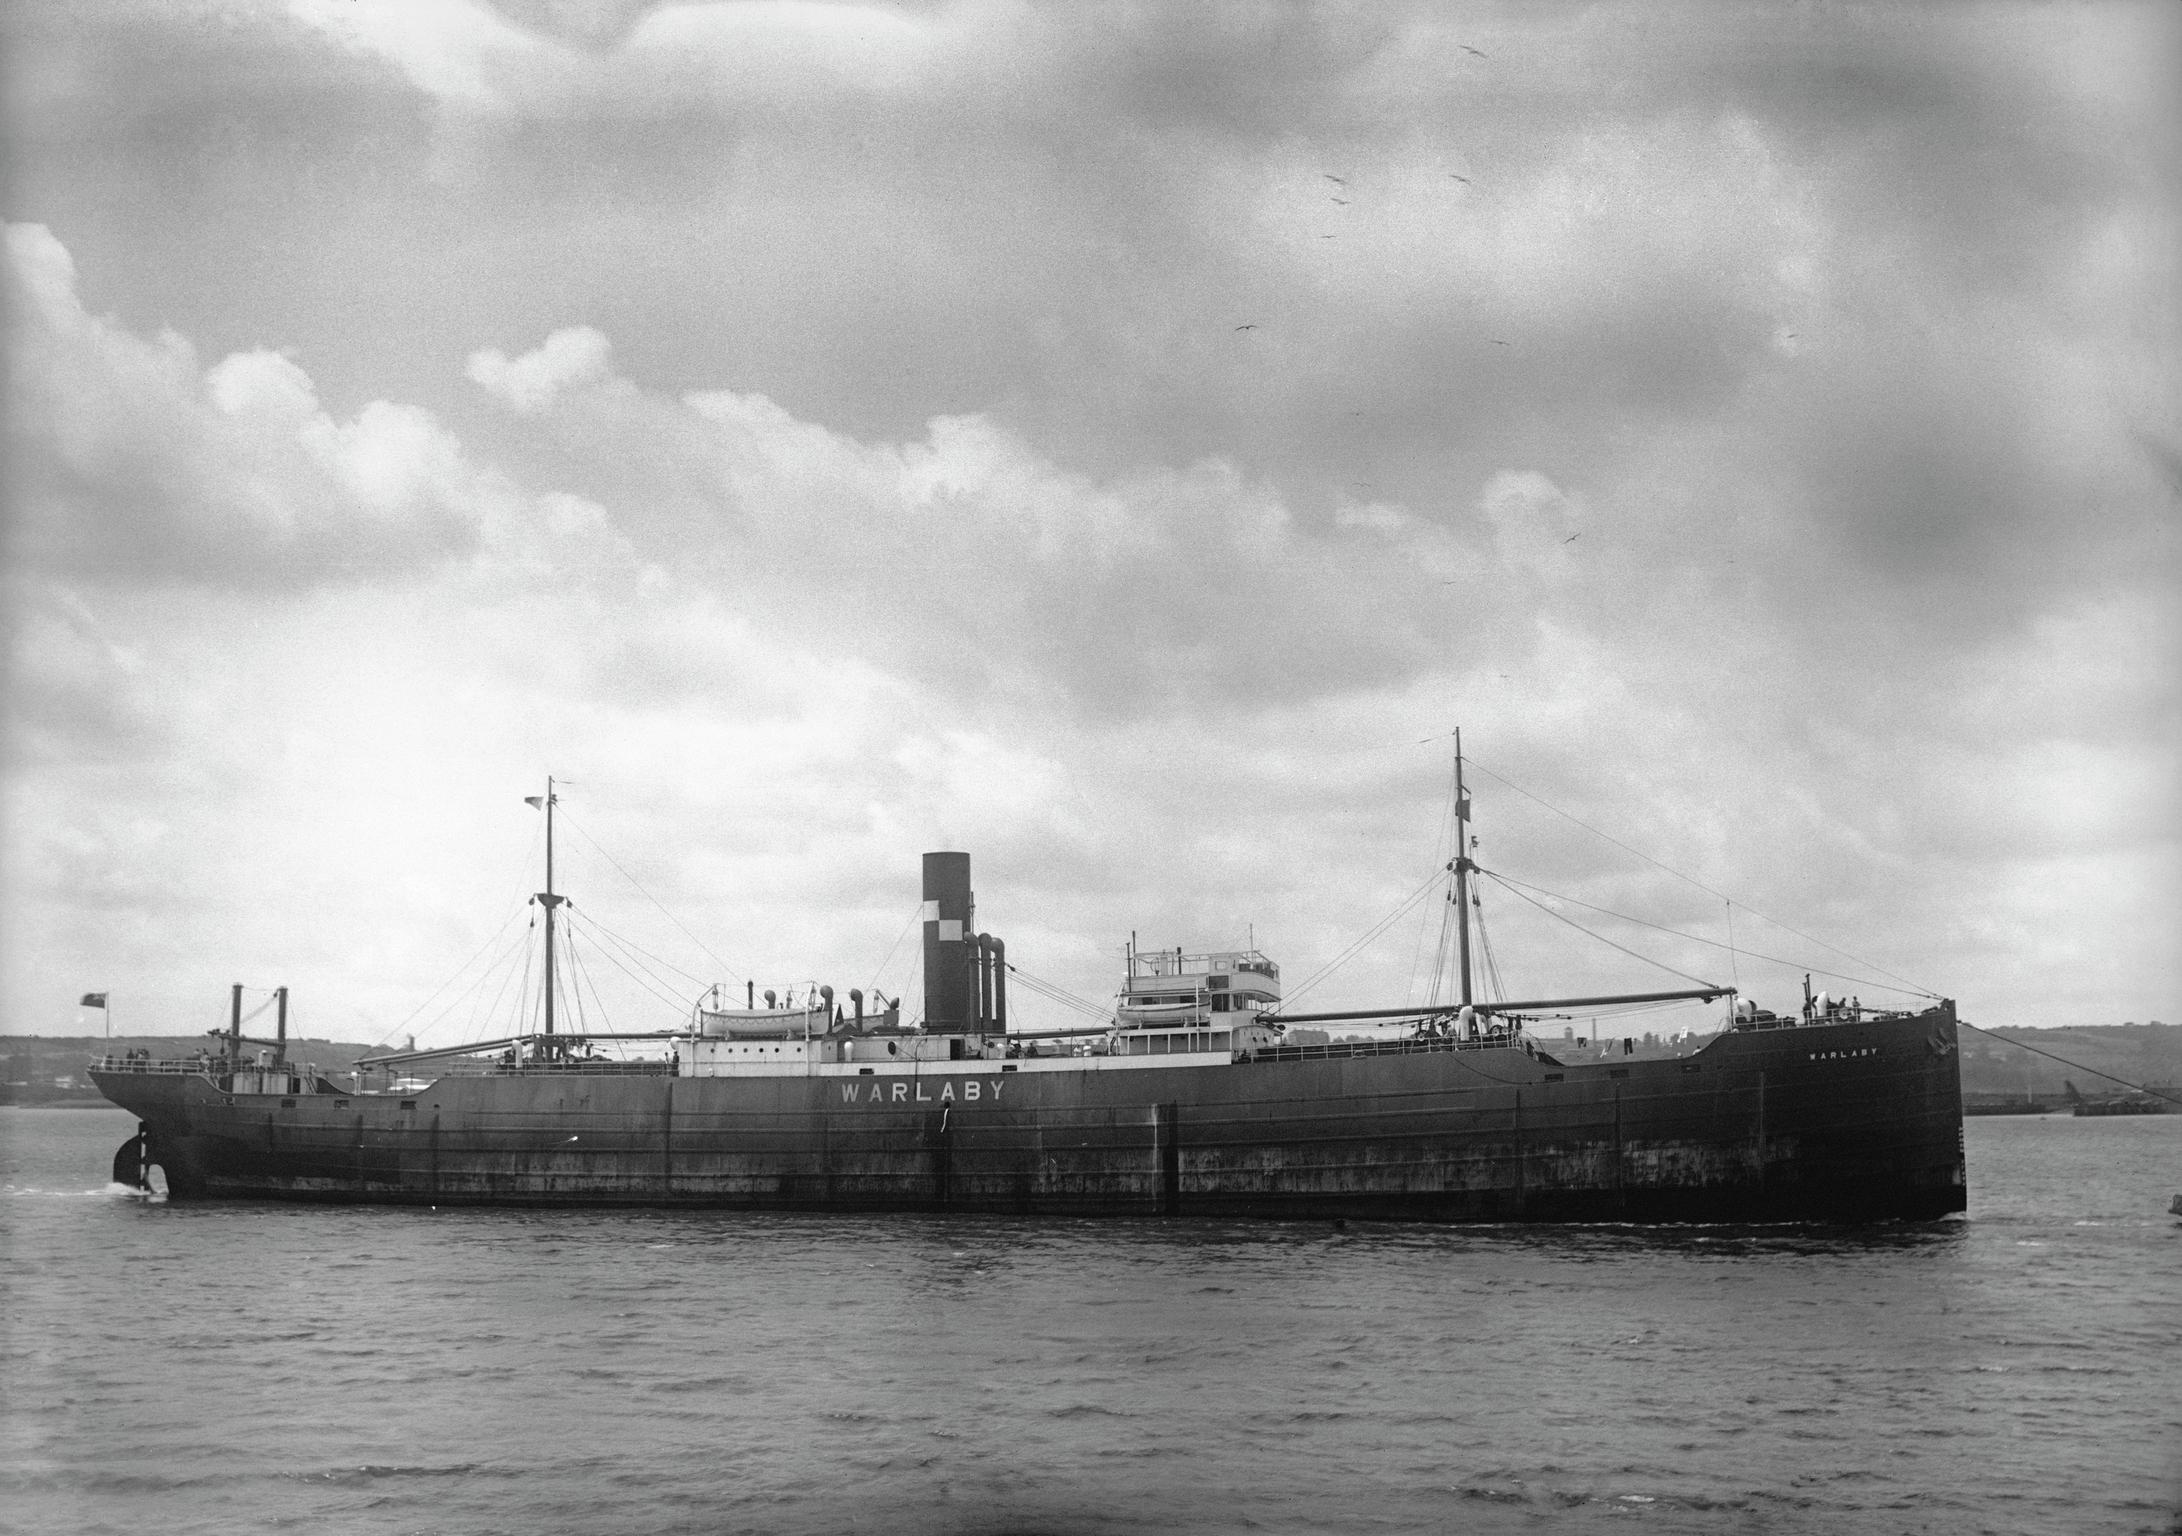 S.S. WARLABY, glass negative